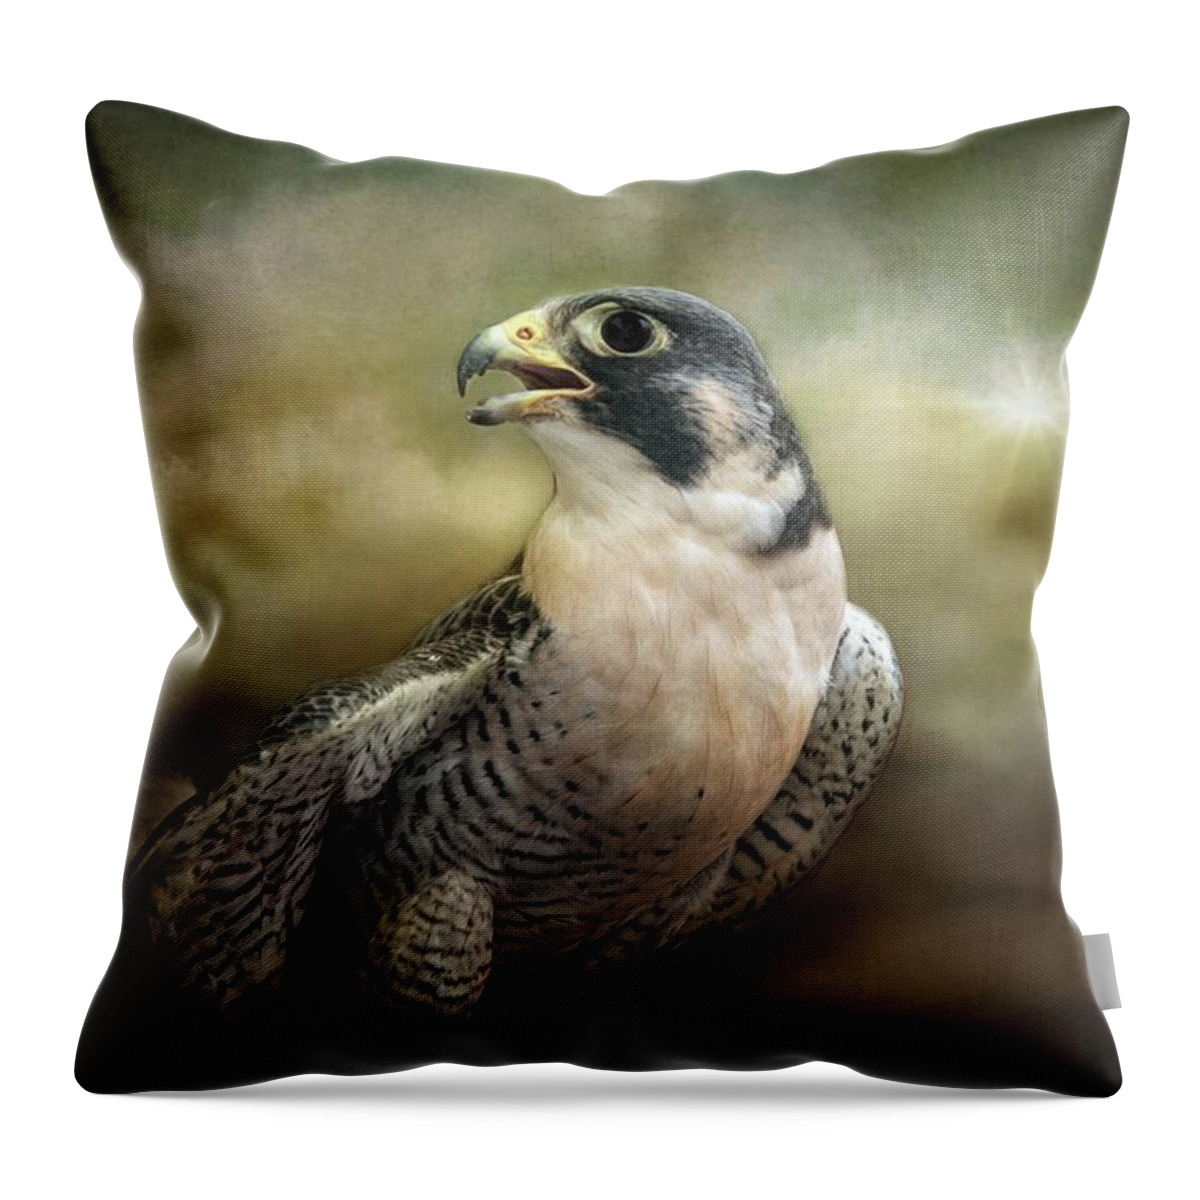 Peregrine Falcon Throw Pillow featuring the photograph Peregrine Falcon Stormy Dramatic Sky by Melissa Bittinger